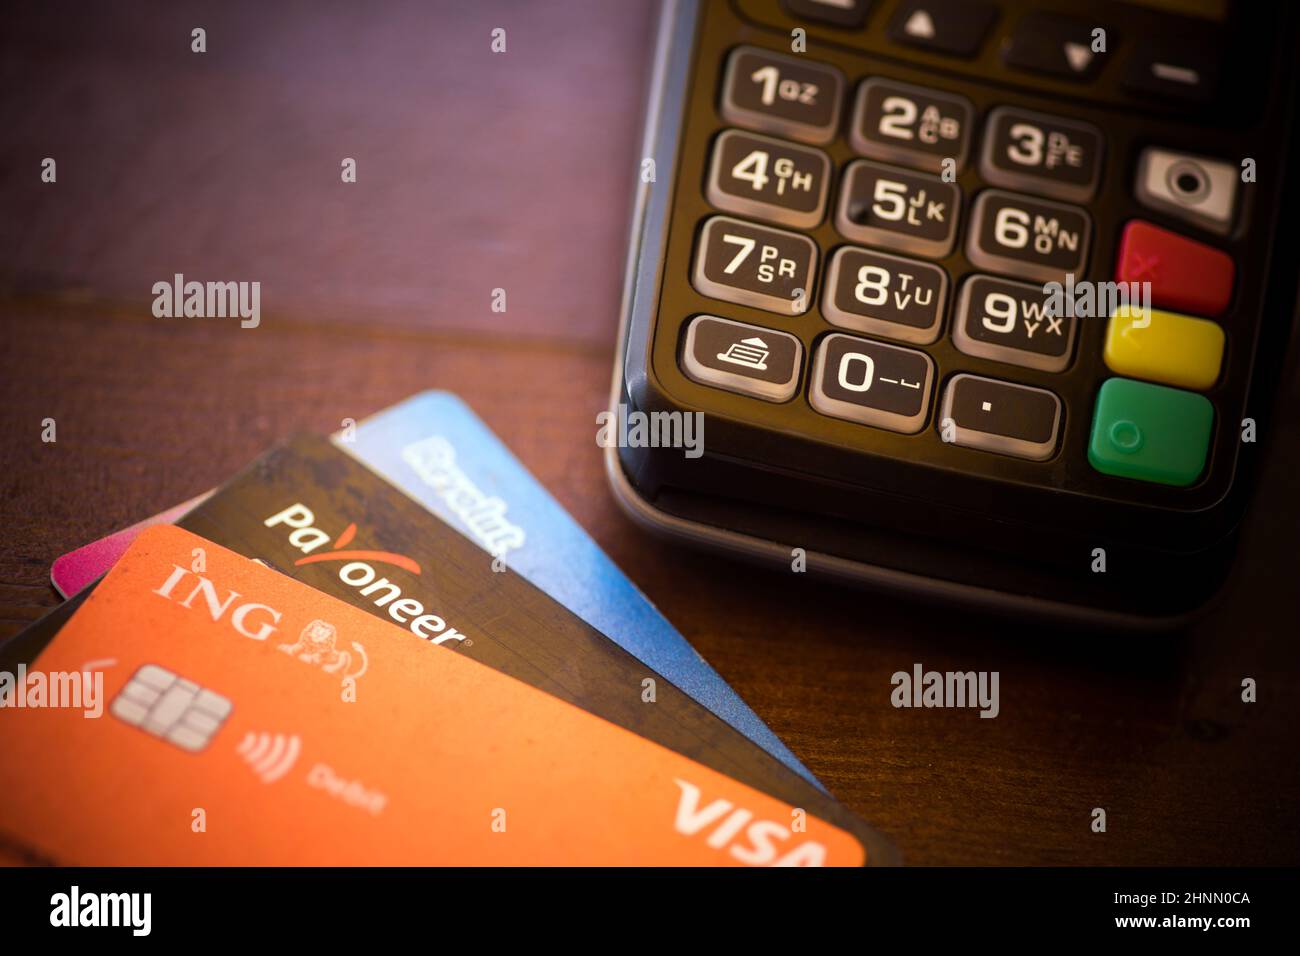 Revolut, ING and Payoneer cards near a POS terminal Stock Photo